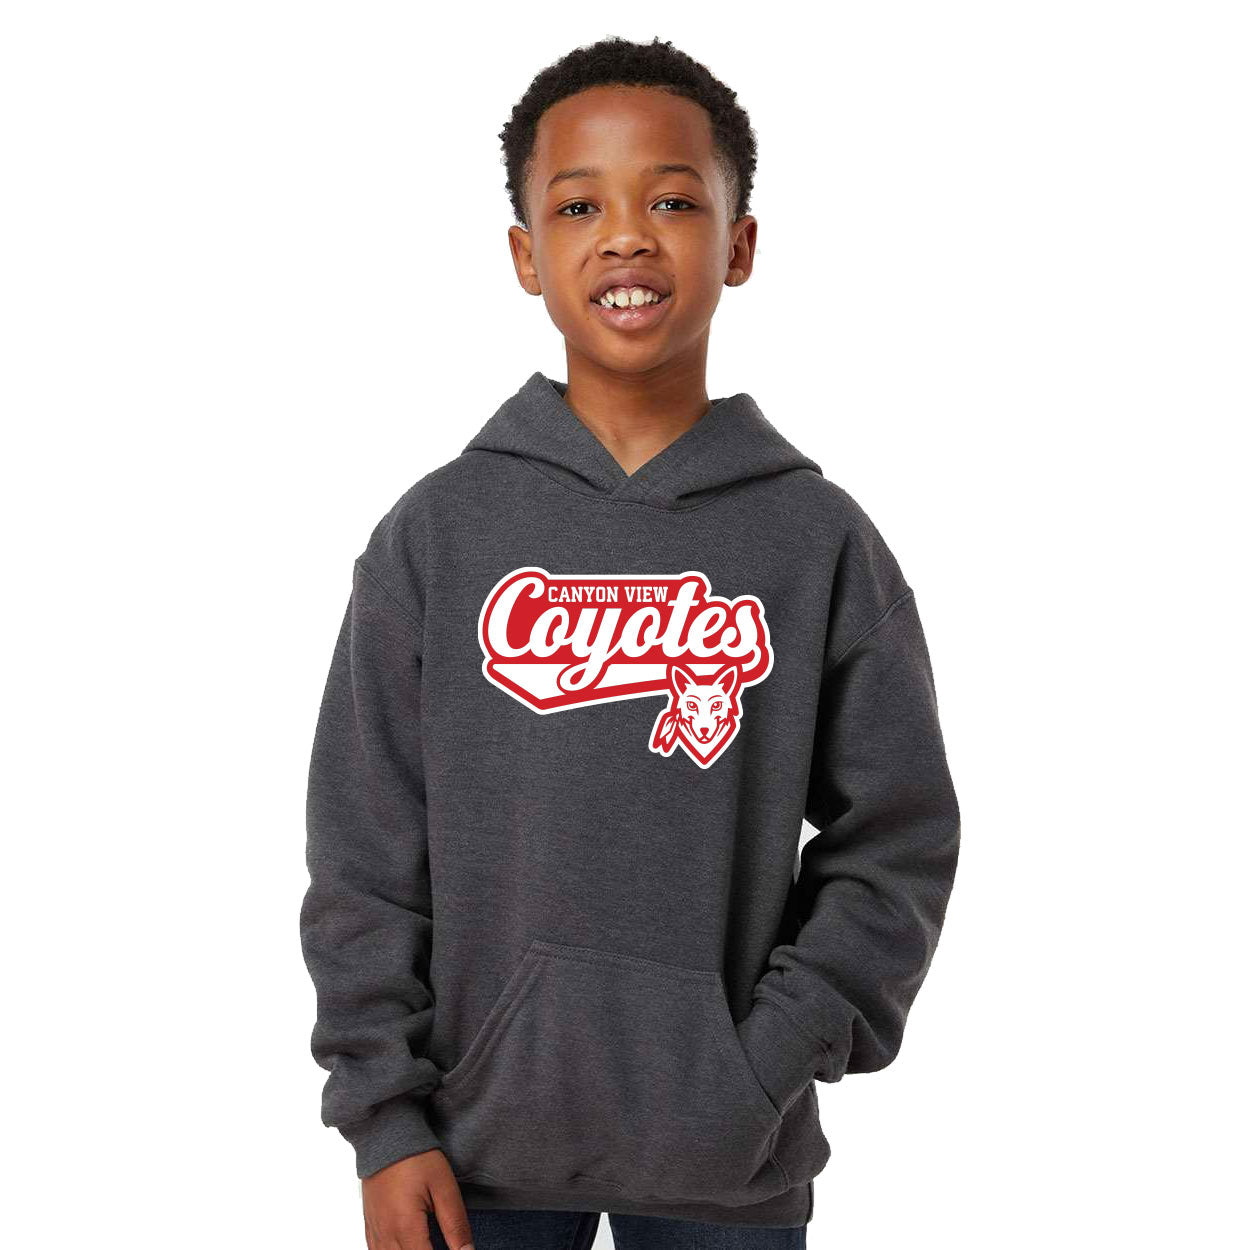 CANYON VIEW COYOTE DESIGN YOUTH HOODED SWEATSHIRT